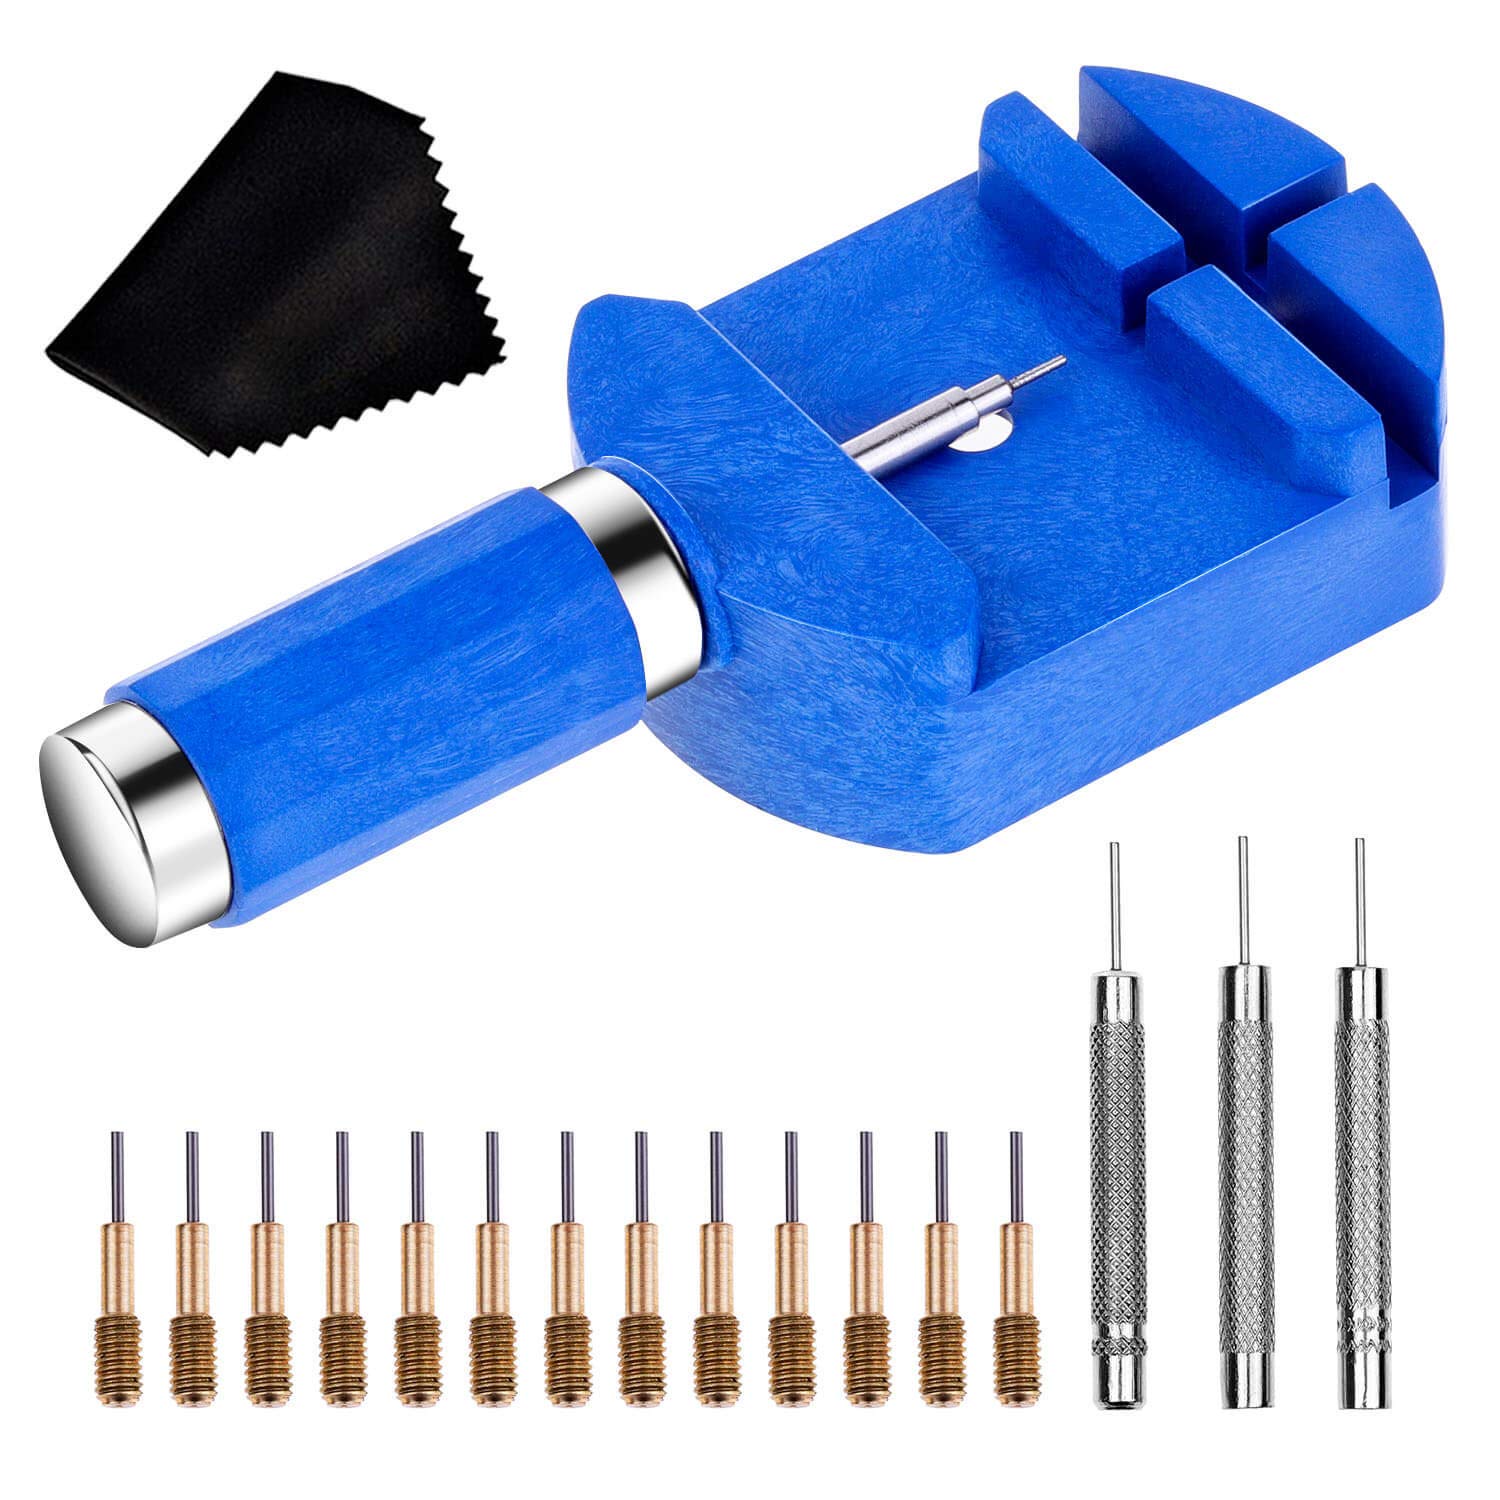 cridoz Watch Link Removal Tool Kit, Watch Band Tool Chain Link Pin Remover with 12pcs Replacement Pins and 3pcs Pin Punches for Watch Bracelet Sizing, Watch Strap Adjustment and Watch Repair